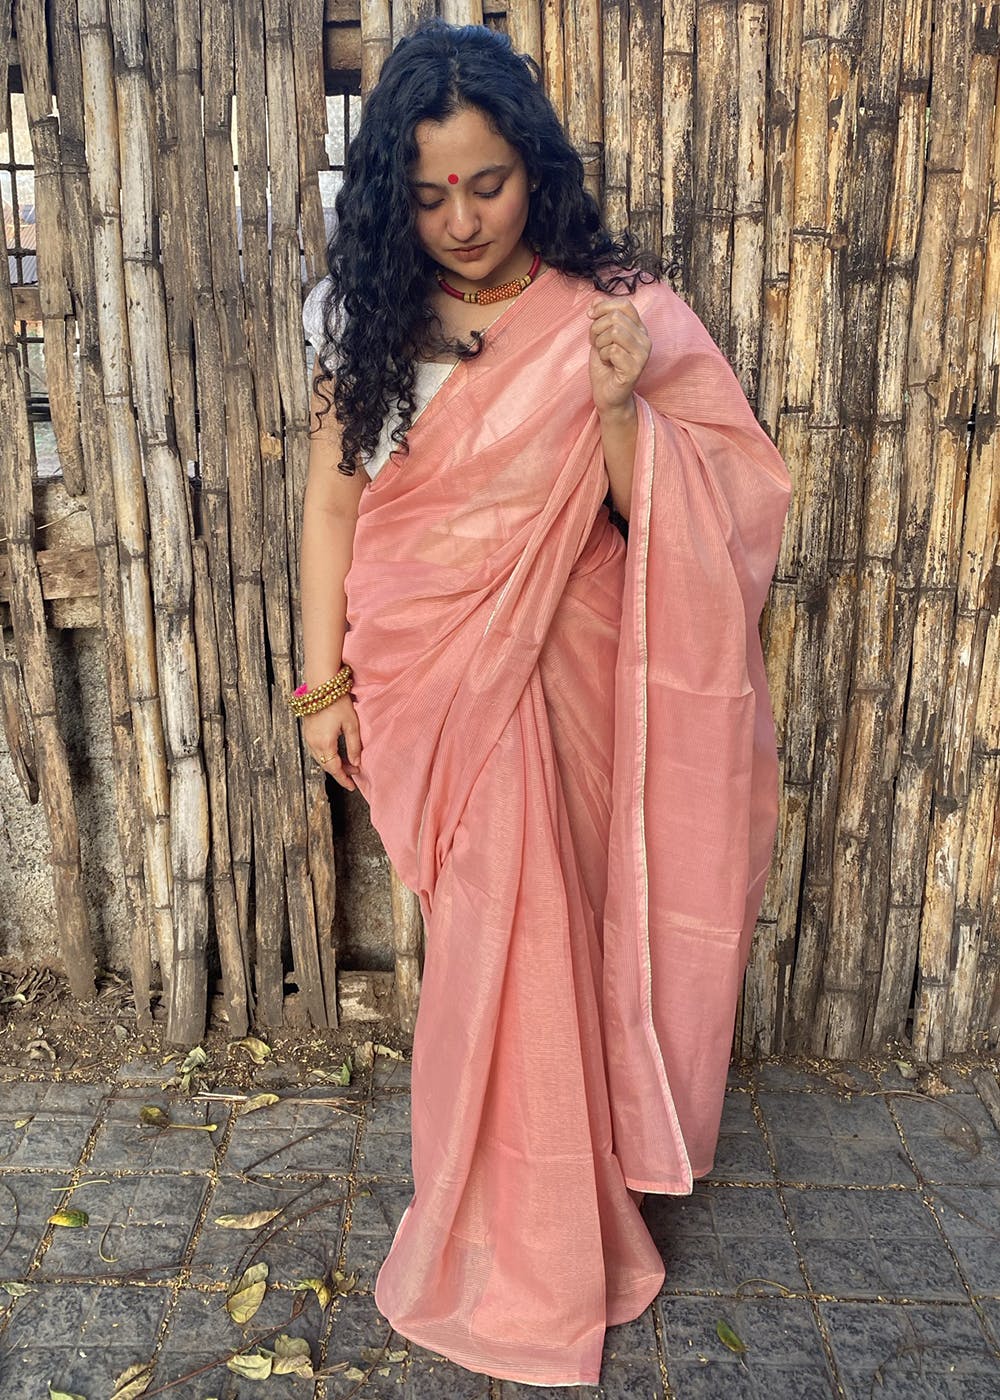 Get Classic Pink Solid Cotton Saree At ₹ 2500 Lbb Shop